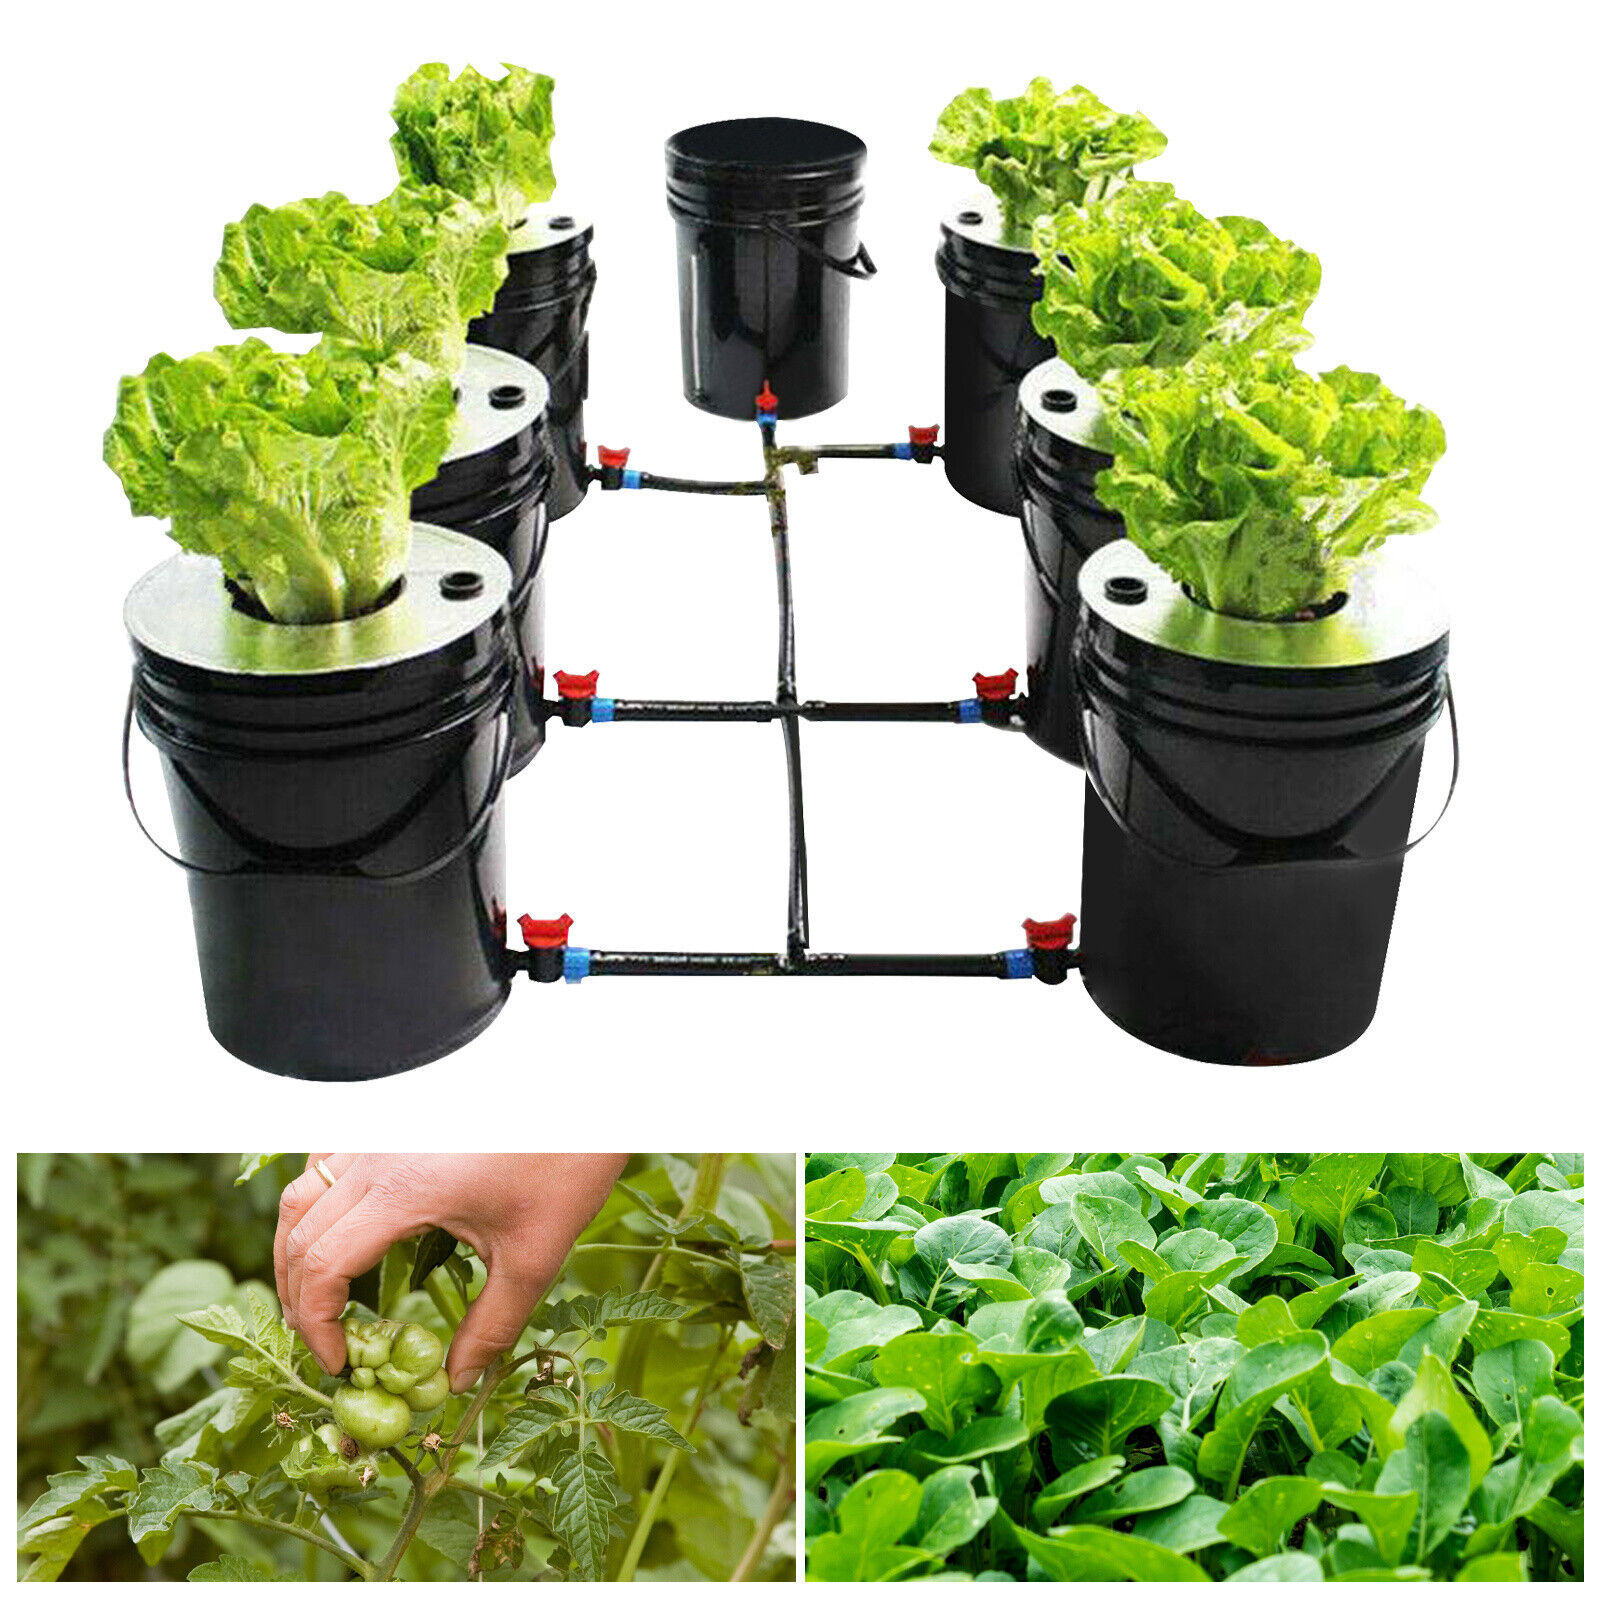 (1+6) x 5 Gal. Bucket DWC Hydroponic Soilless planting system for Indoor&Outdoor